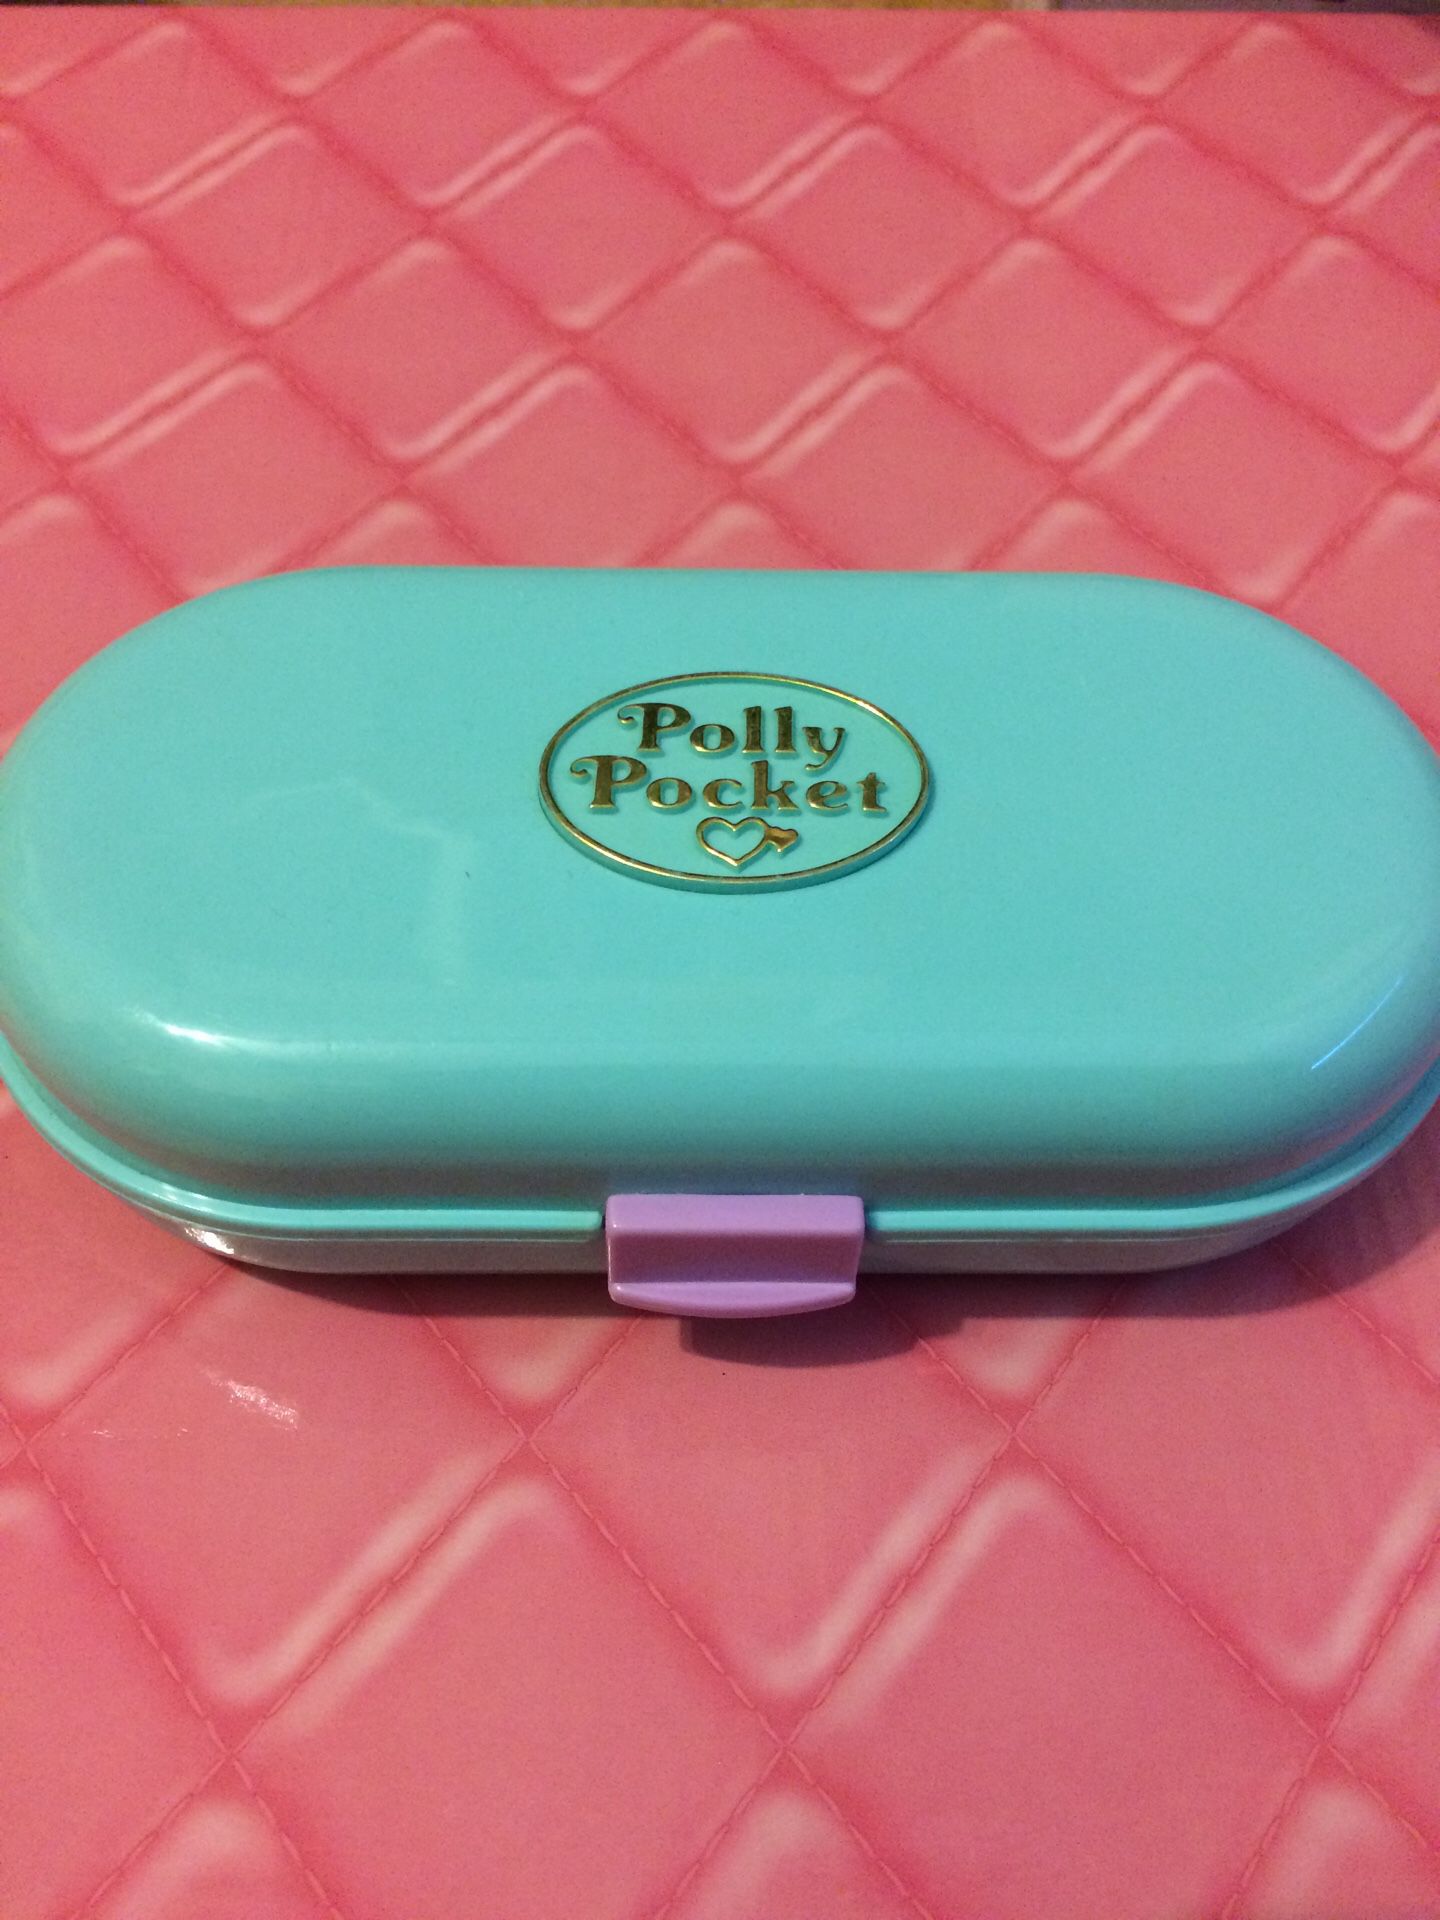 Vintage collectible toy polly pocket compact playset 1992 babysitting playground